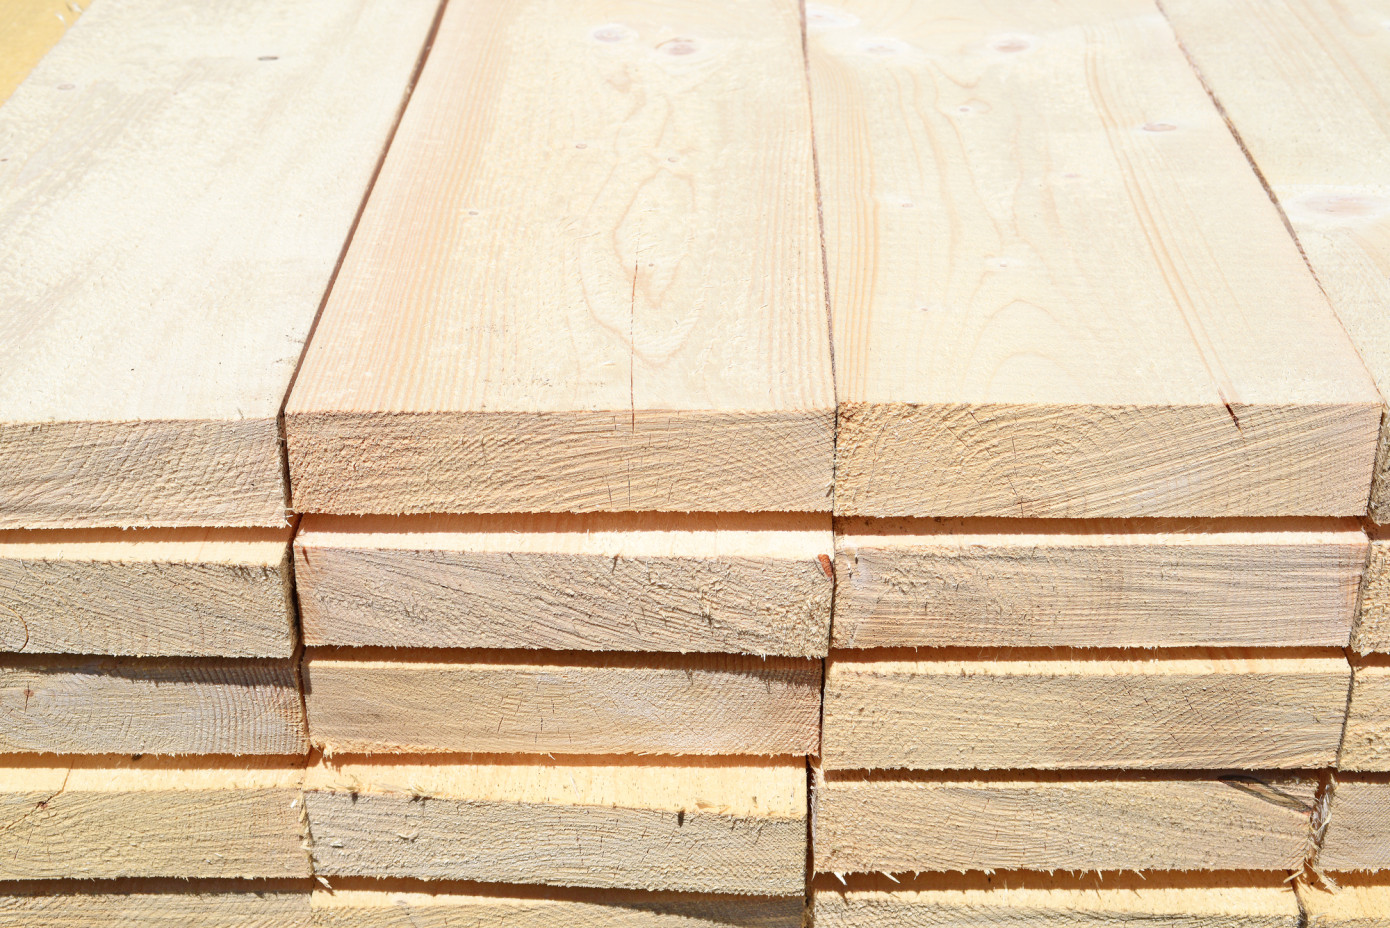 In April, price for softwood lumber imported to China rises 4%